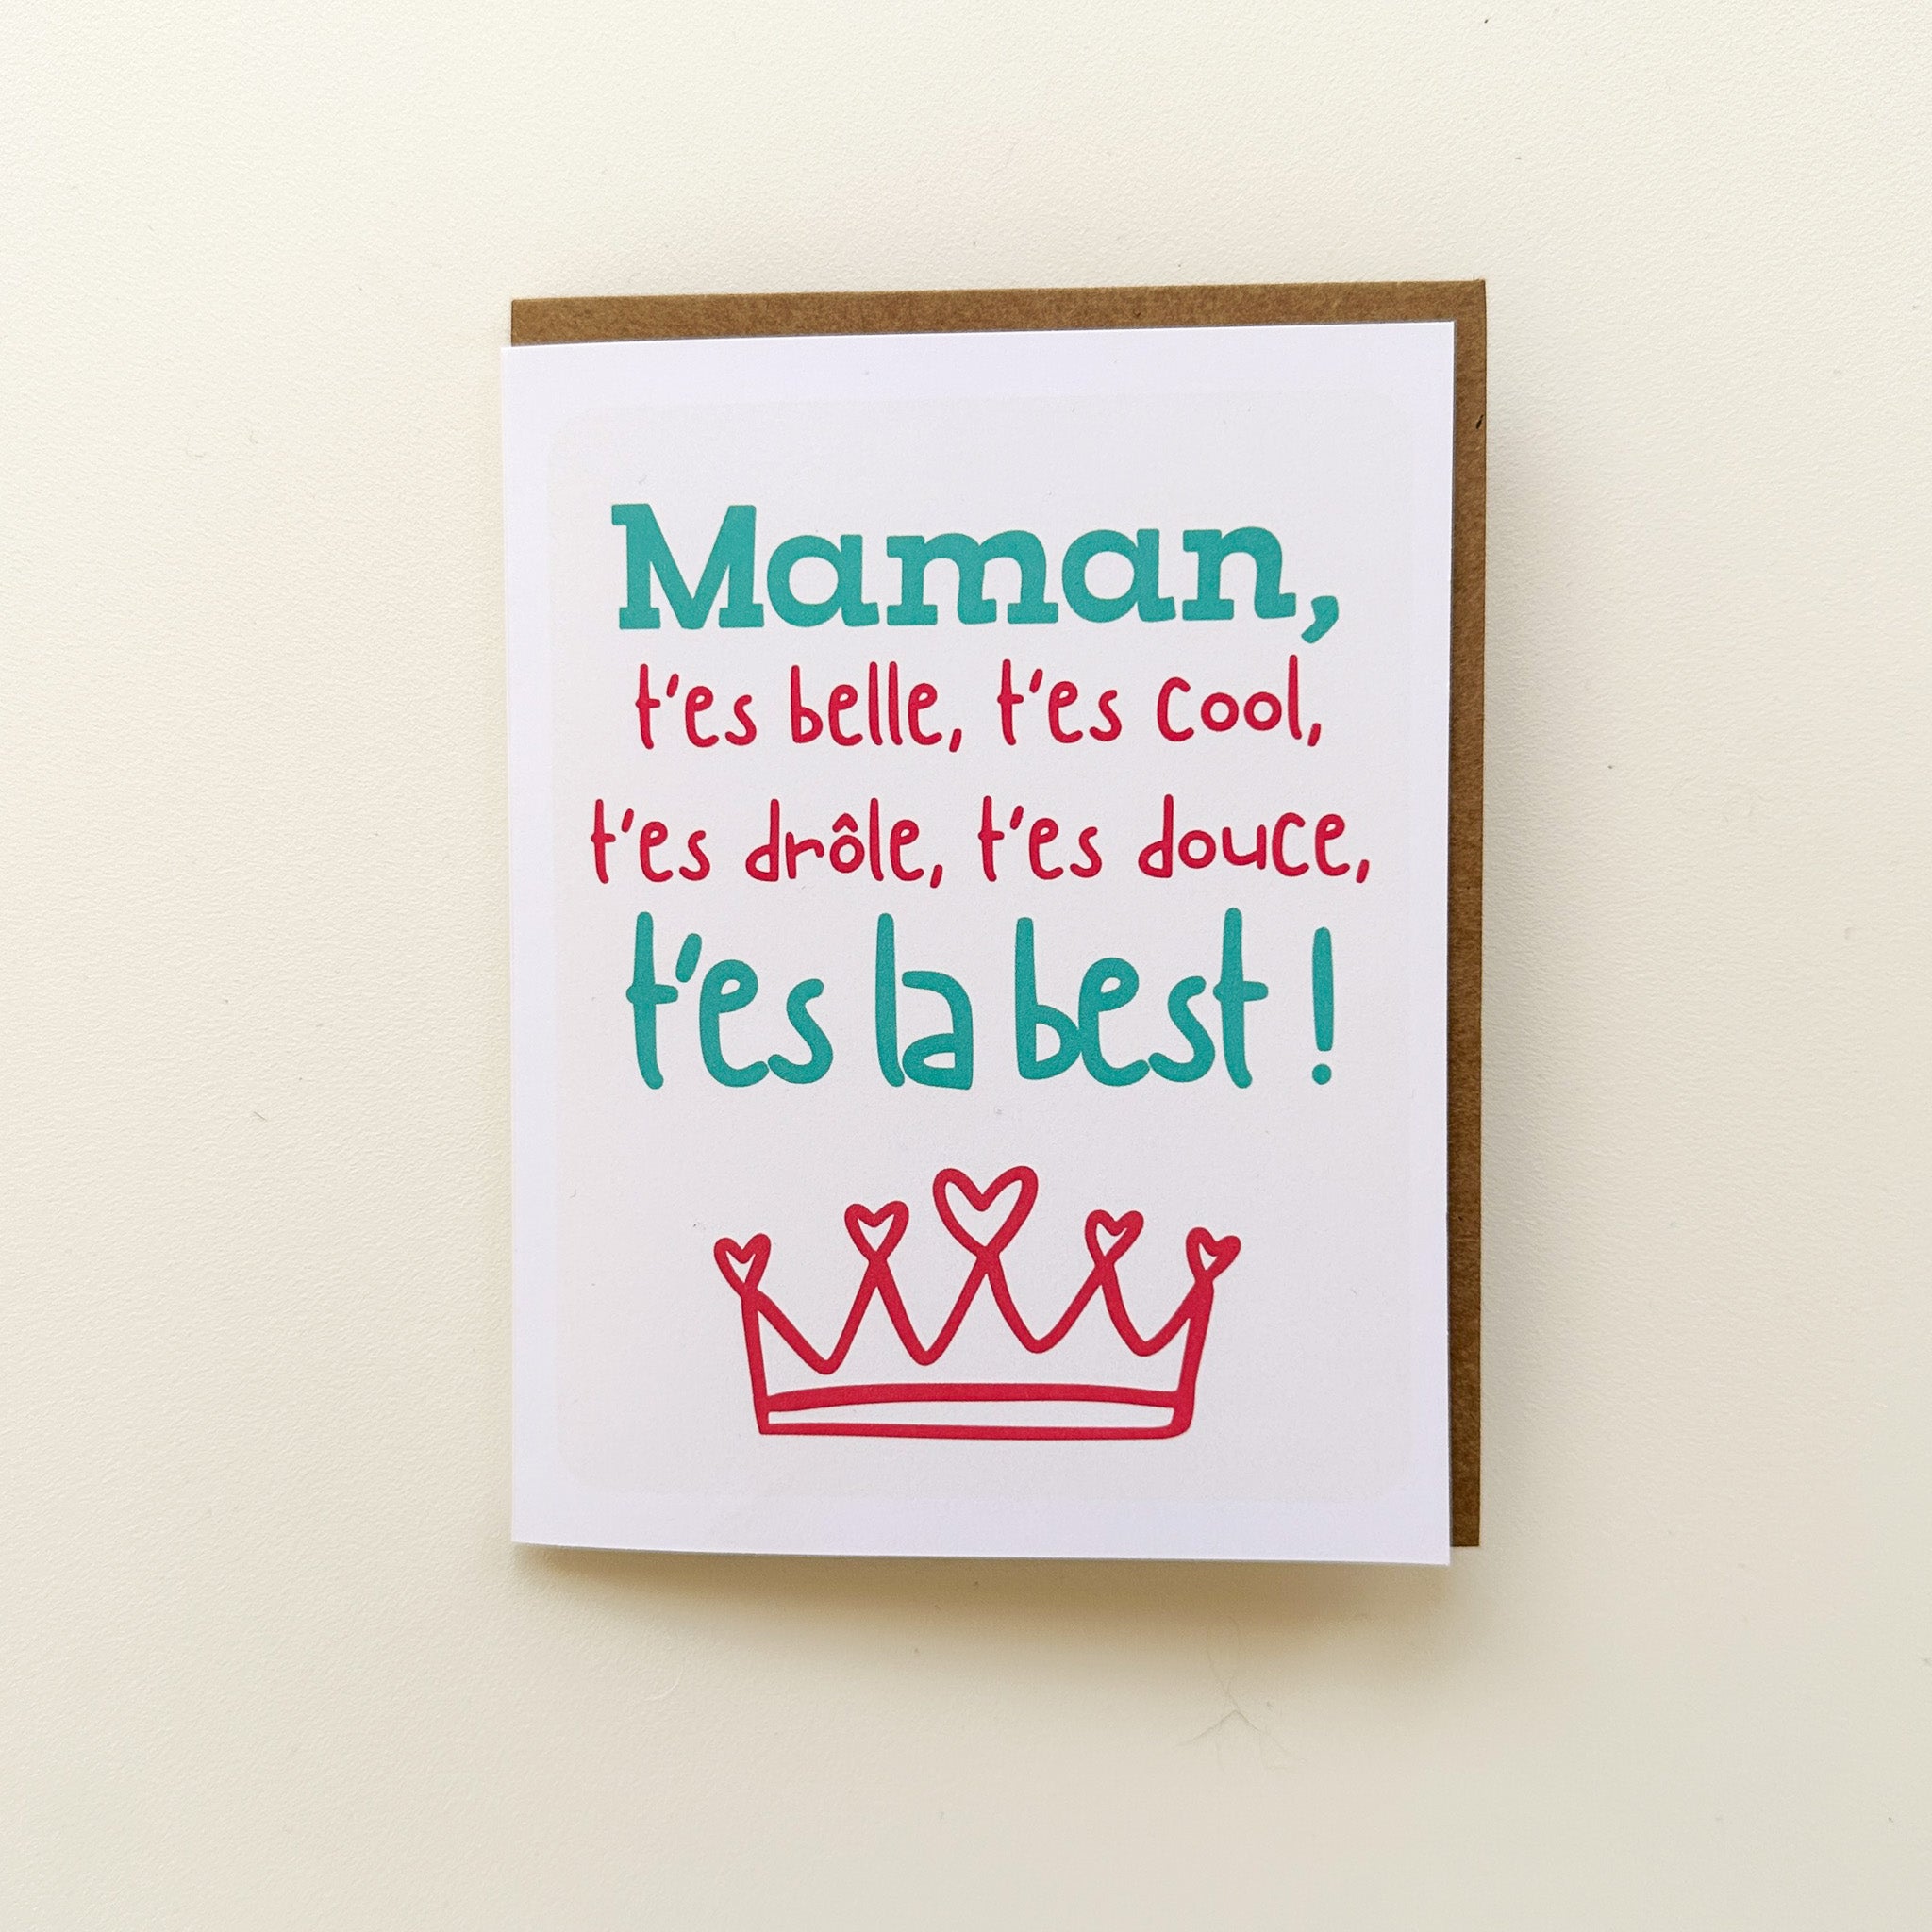 Greeting card - Mom, you're the best.